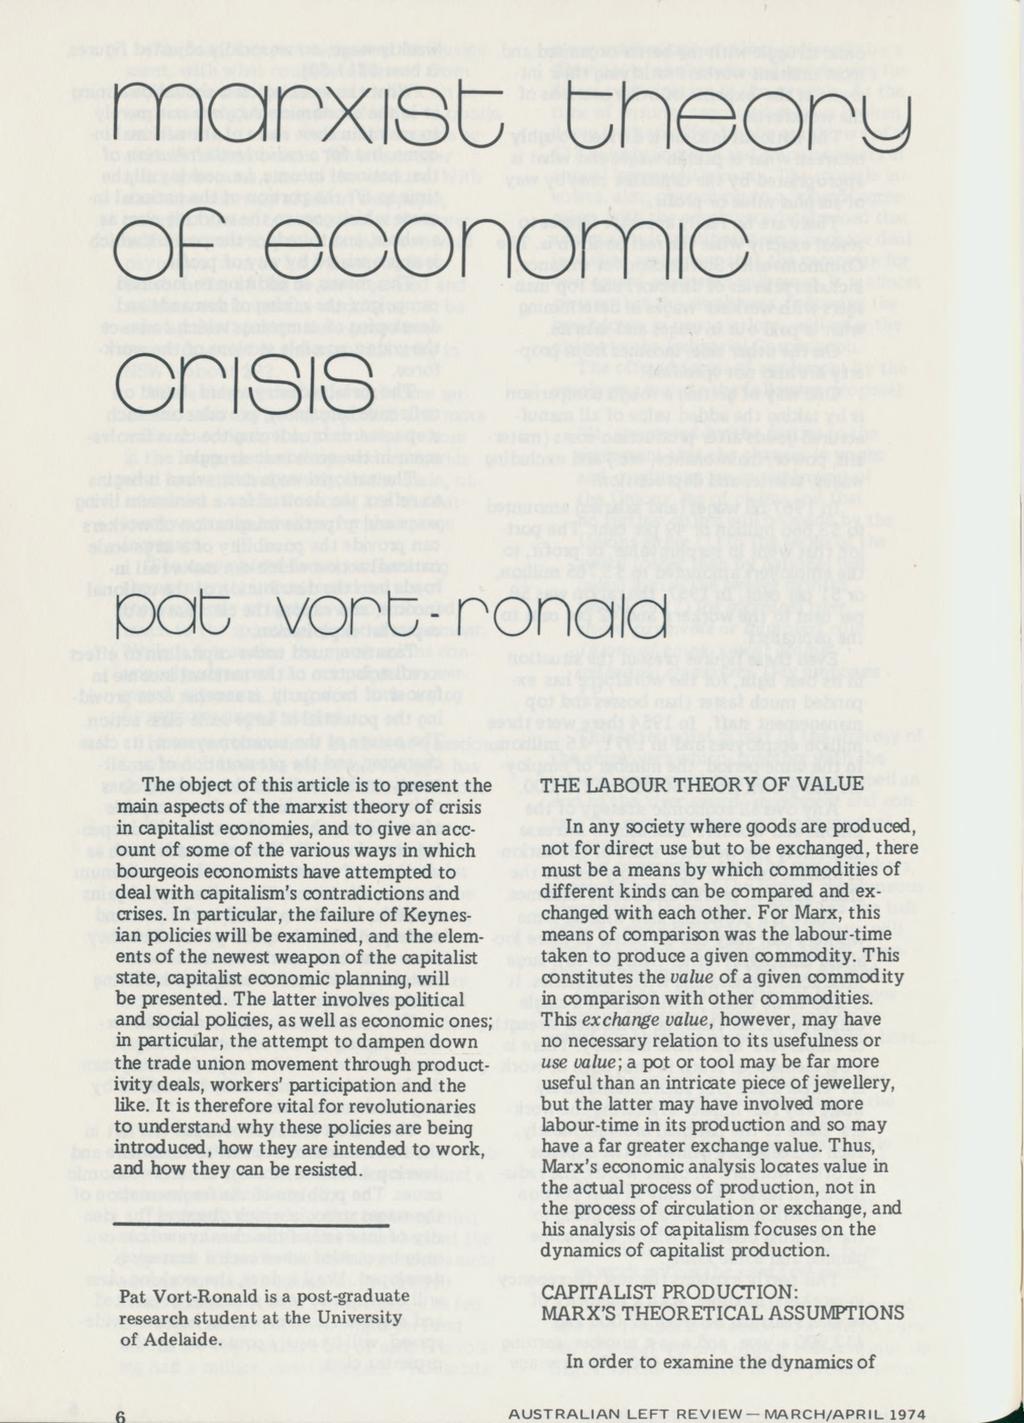 A U S T R A L IA N LE F T R E V IE W M A R C H /A P R IL 1974 marxisc theory op economic crisis pat; vont-nonaia The object of this article is to present the main aspects of the marxist theory of